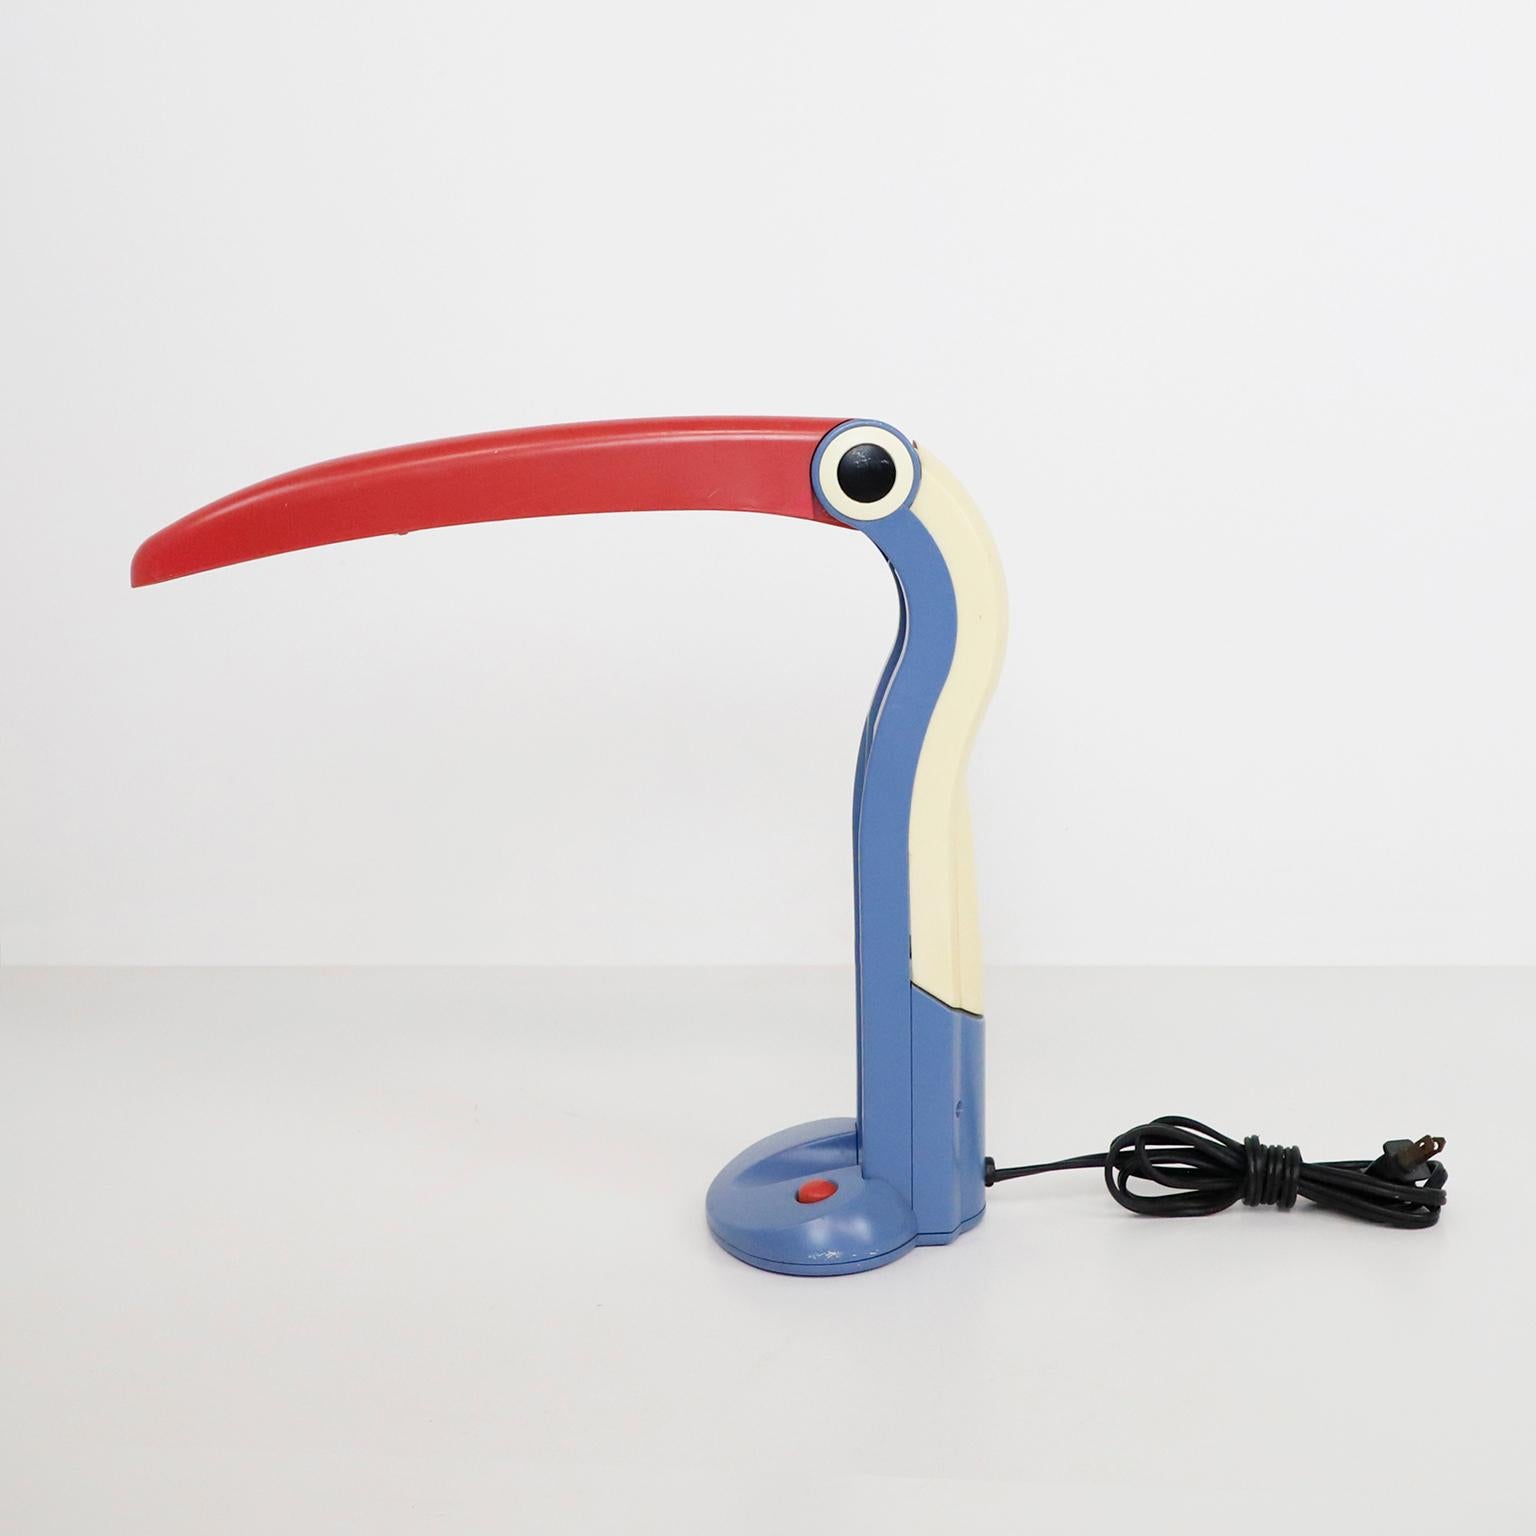 We offer this vintage table lamp in toucan form, designed by H.T Huang in the 1980s with original label. The lamp works.